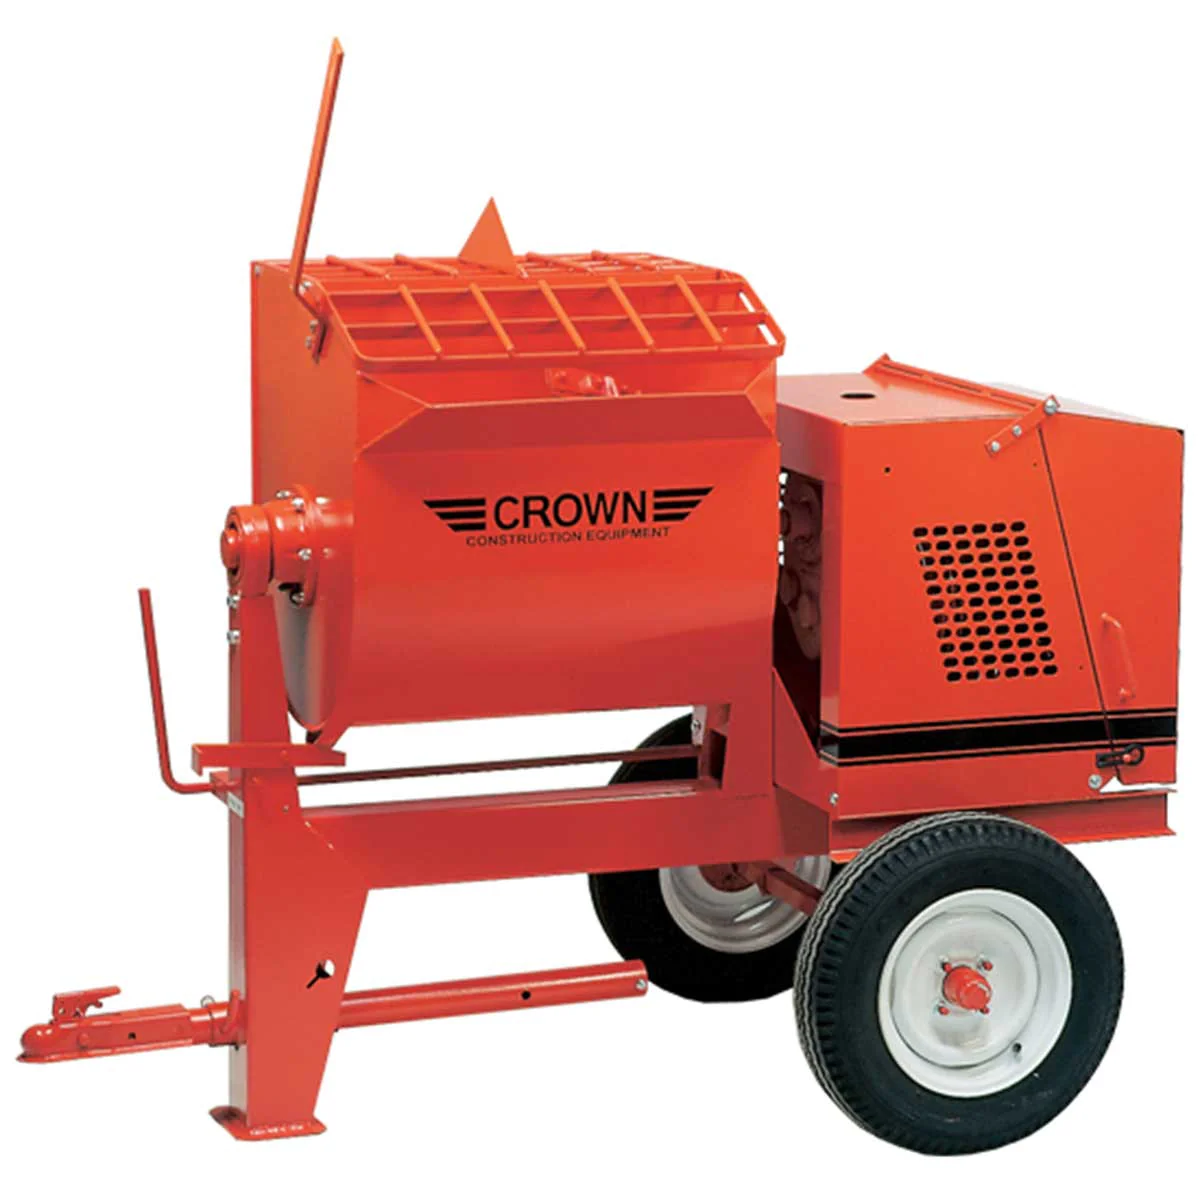 A powerful mixer for concrete pouring into a wheelbarrow with precision and safety.